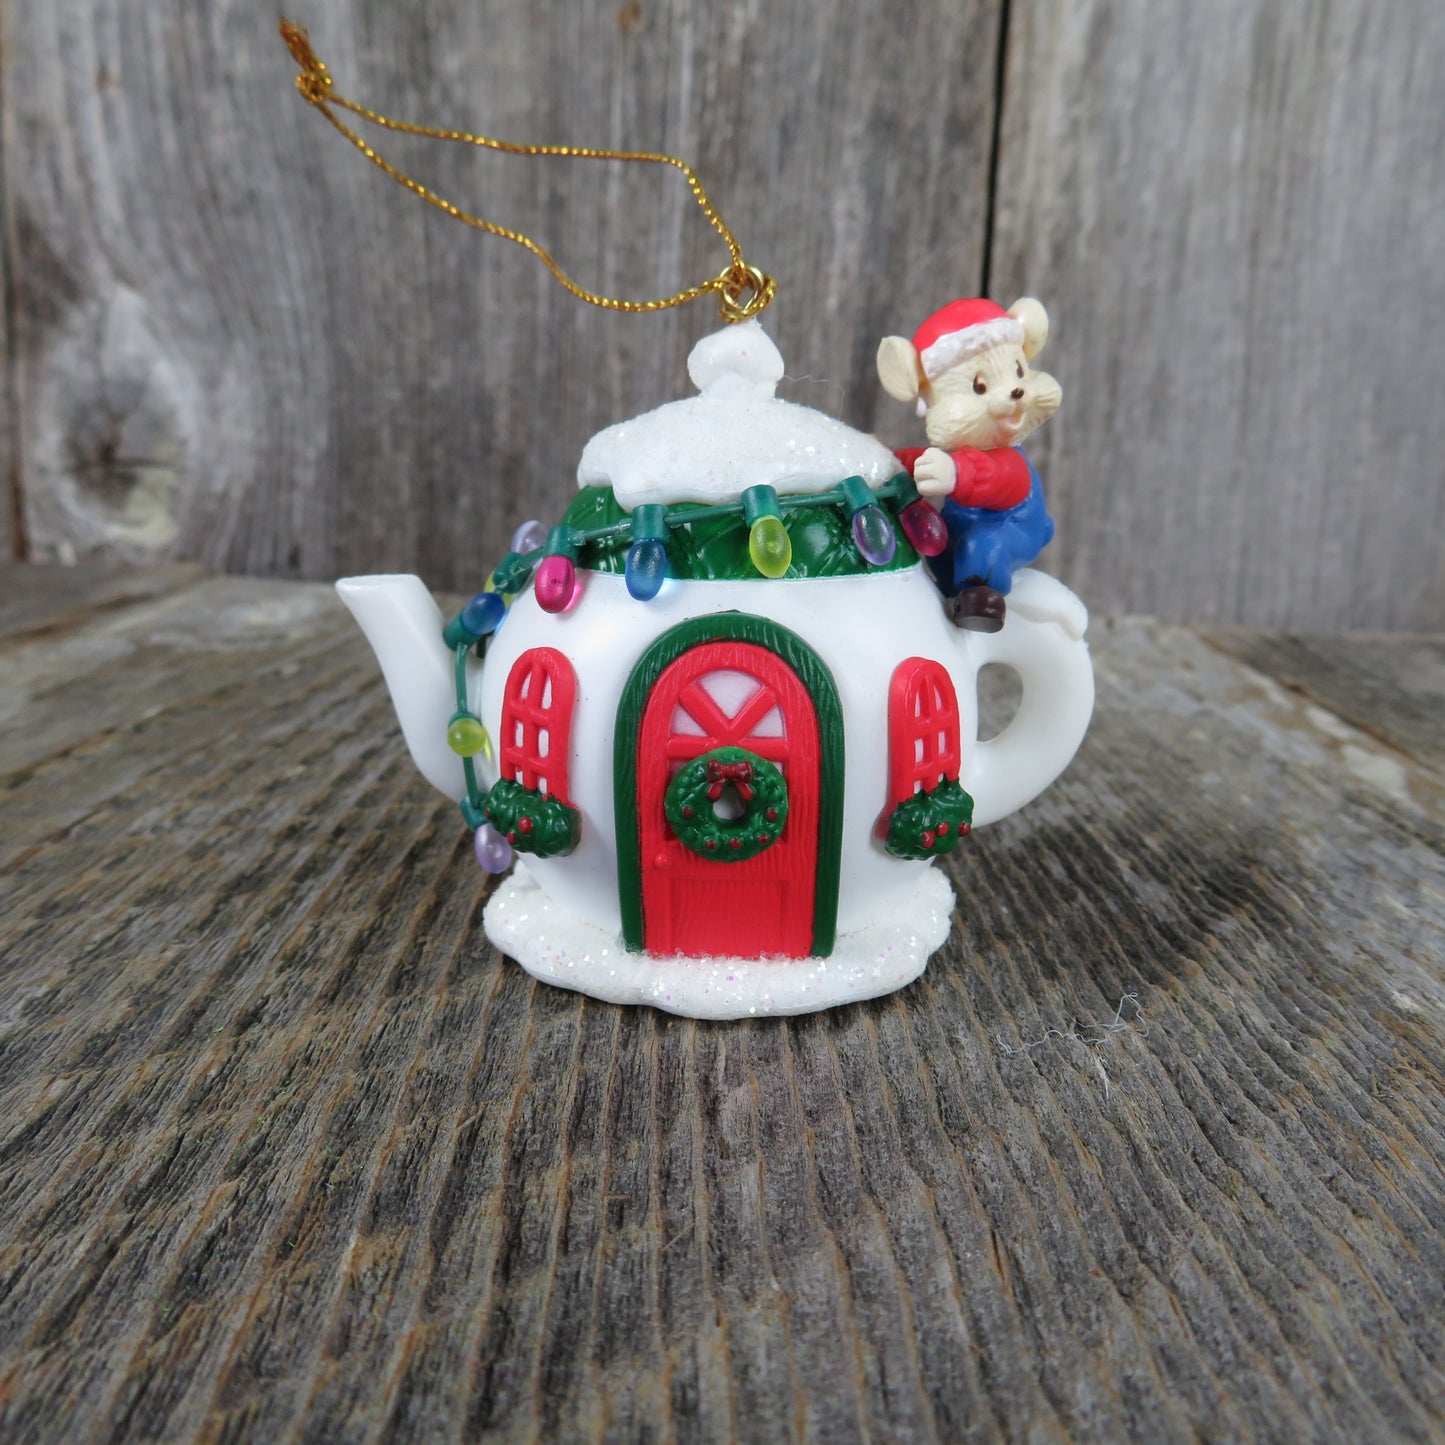 Vintage Mouse Teapot House Ornament Mouse Decorating Christmas Lights Westmar 1995 - At Grandma's Table